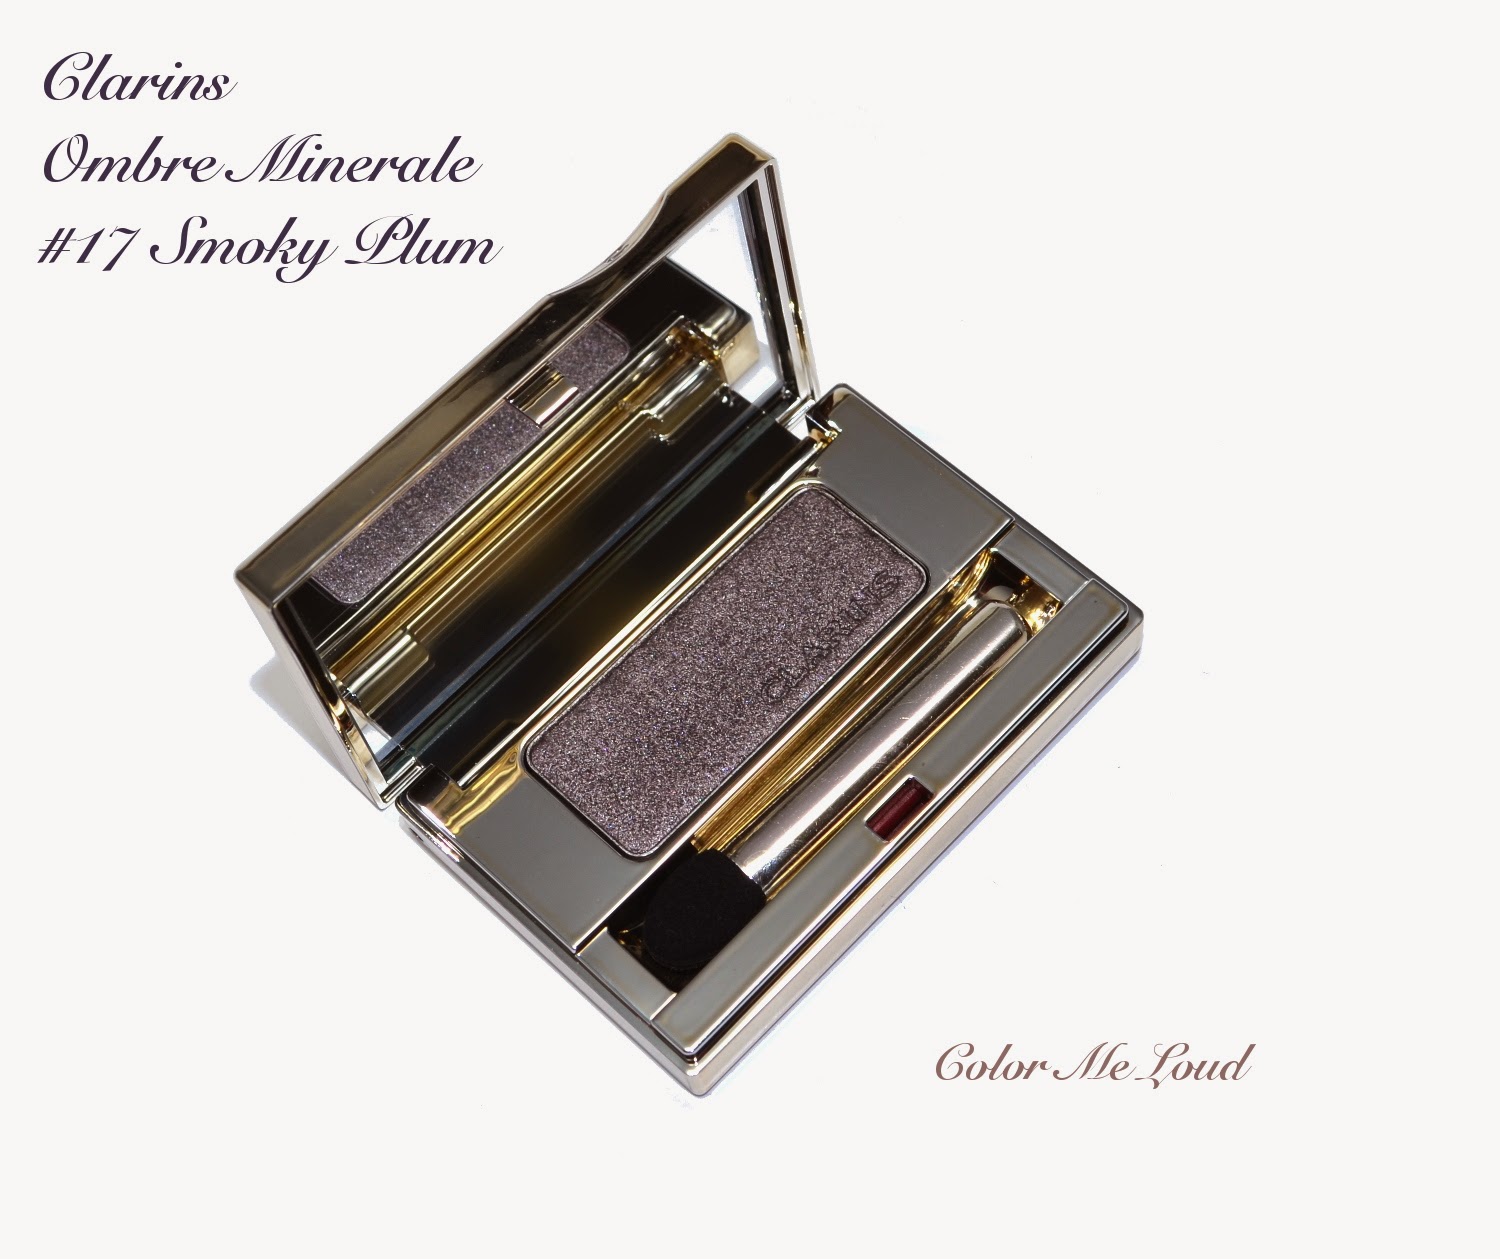 Clarins Ombre Minerale #17 Smoky Plum for Spring 2014 Opalescence Collection